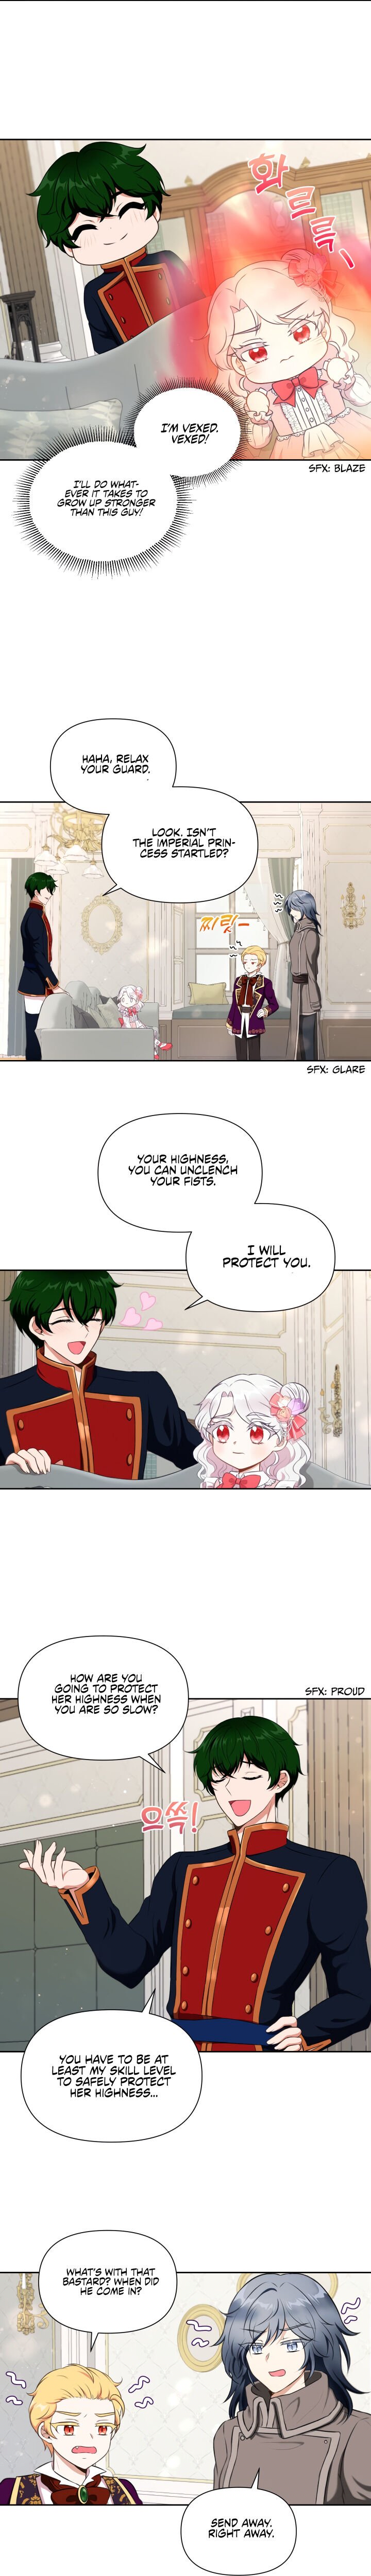 The Princess is Evil chapter 12